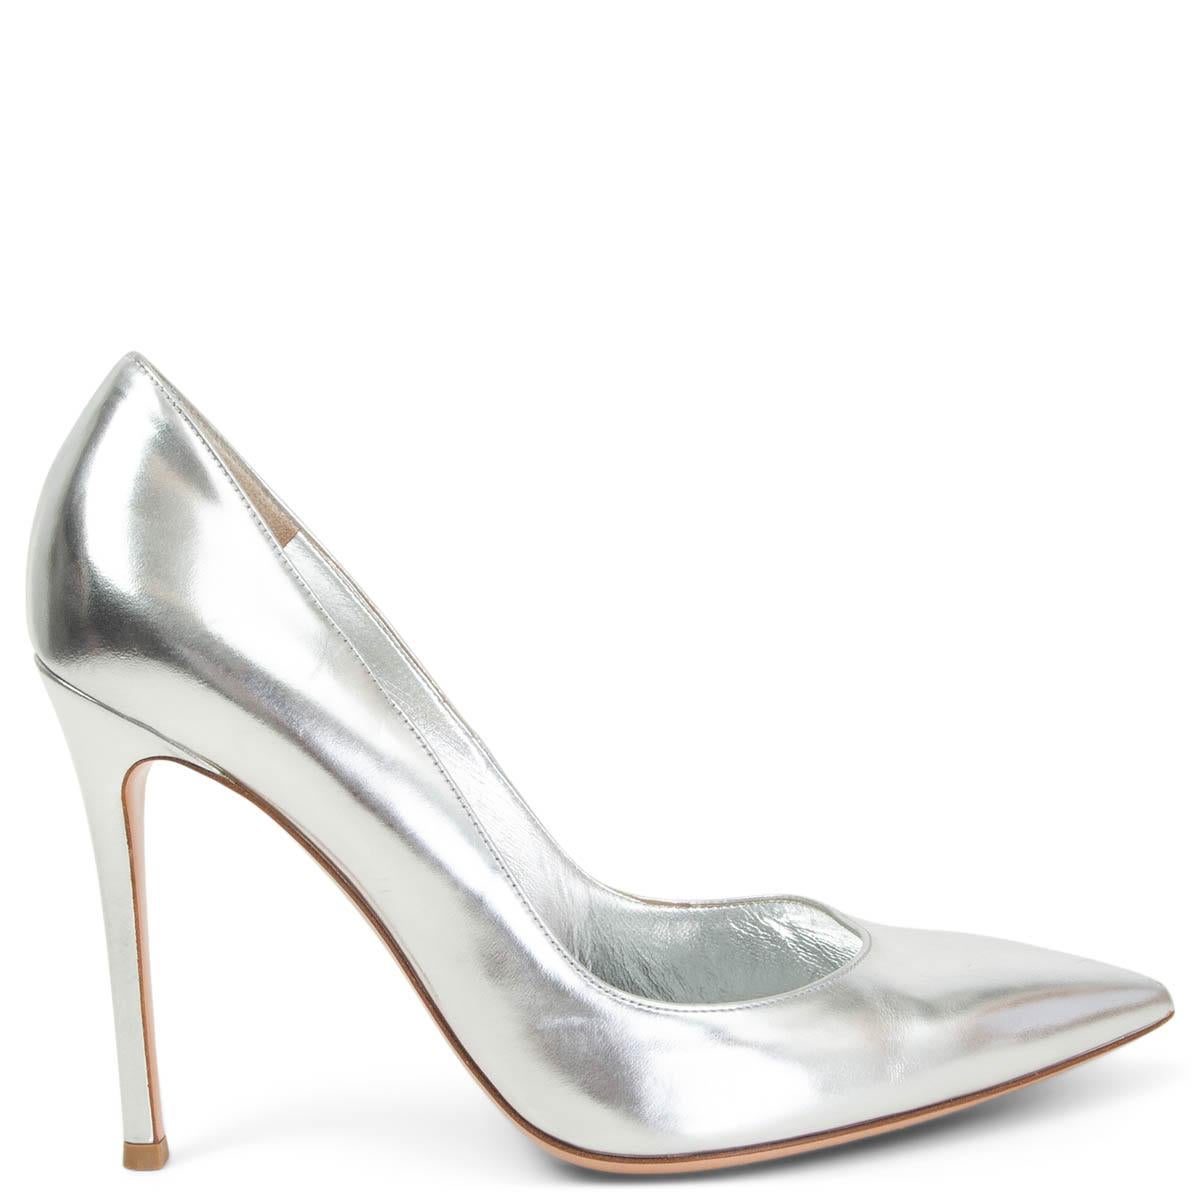 100% authentic Gianvito Rossi Gianvito 105 pointed-toe pumps in metallic silver-tone leather. Have been worn with a few scratches and marks on the left heel and on the side. Overall in good condition. 

Measurements
Imprinted Size	38
Shoe